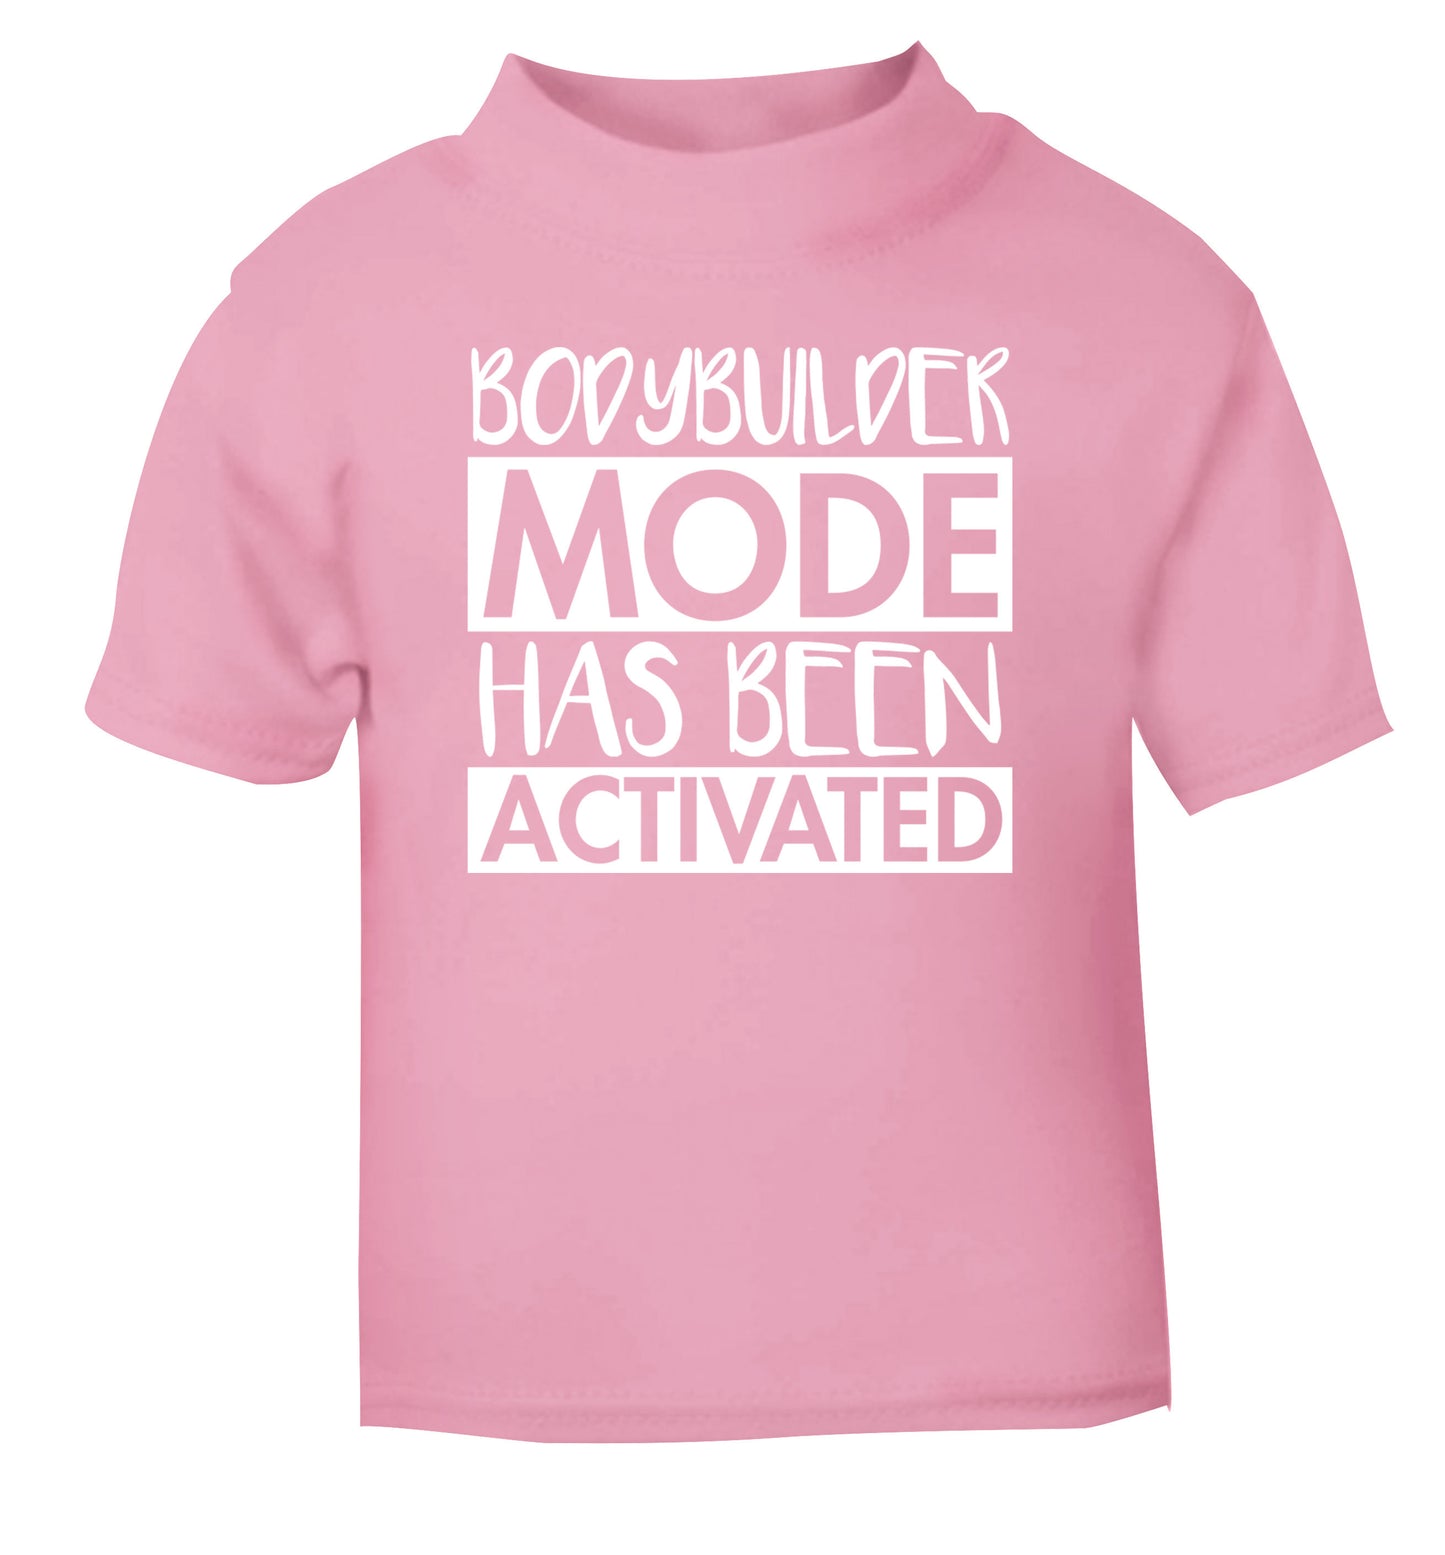 Bodybuilder mode activated light pink Baby Toddler Tshirt 2 Years